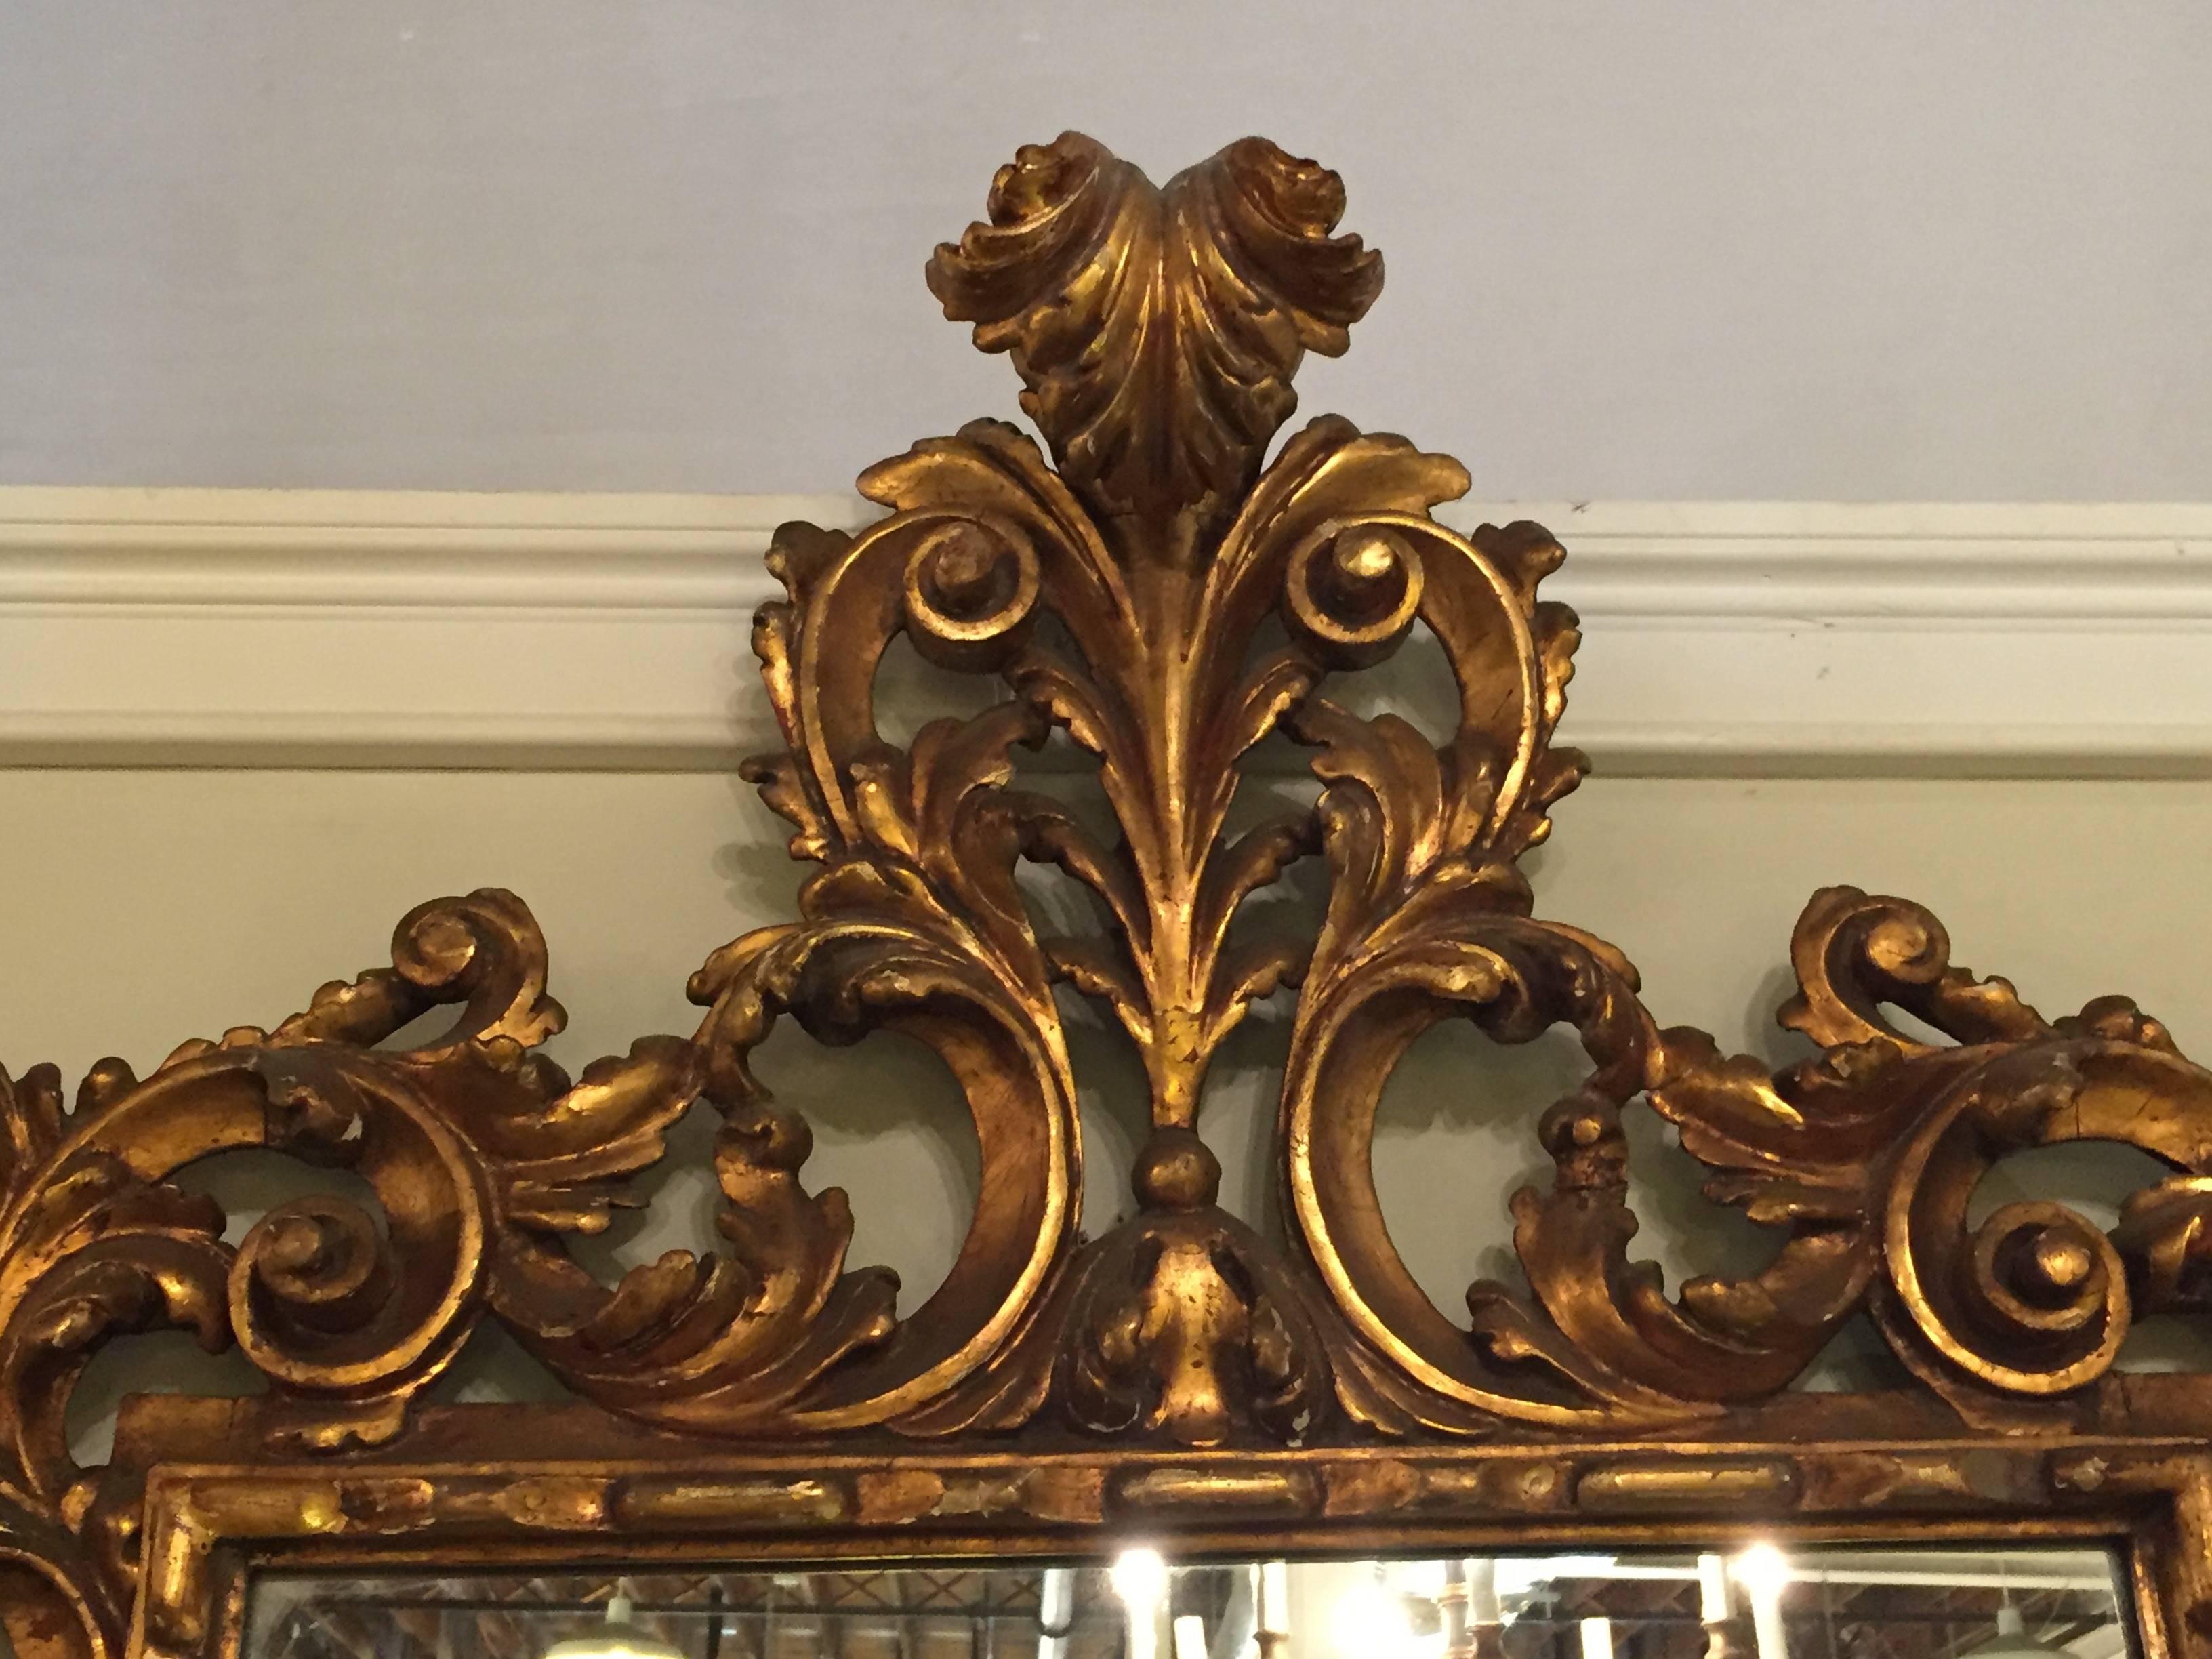 Pair of continental antique gesso and gilt gold carved wall or console mirrors. Each having a wonderfully detailed carved frame of the Rococo taste. Great for a pair of consoles or as bathroom mirrors.